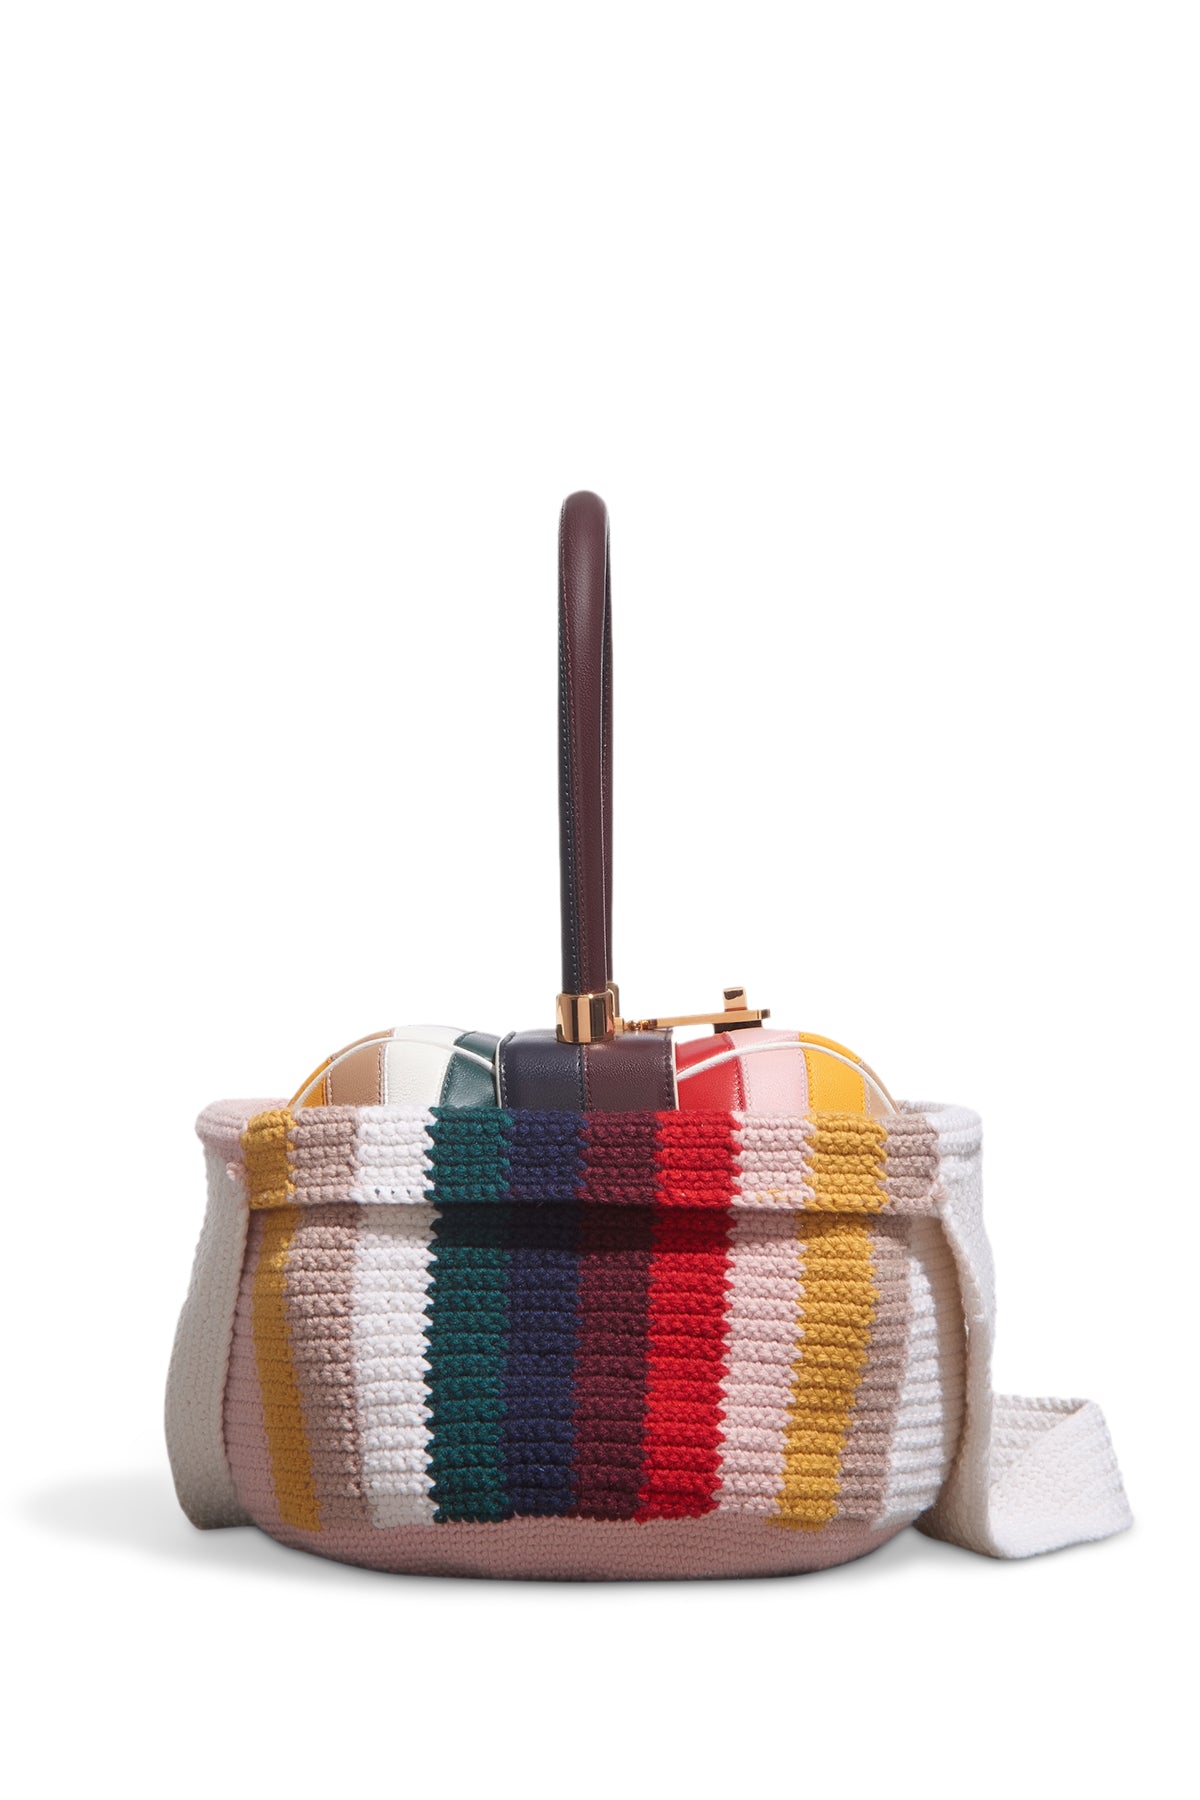 Crossover Knit Bag in Multi Cashmere